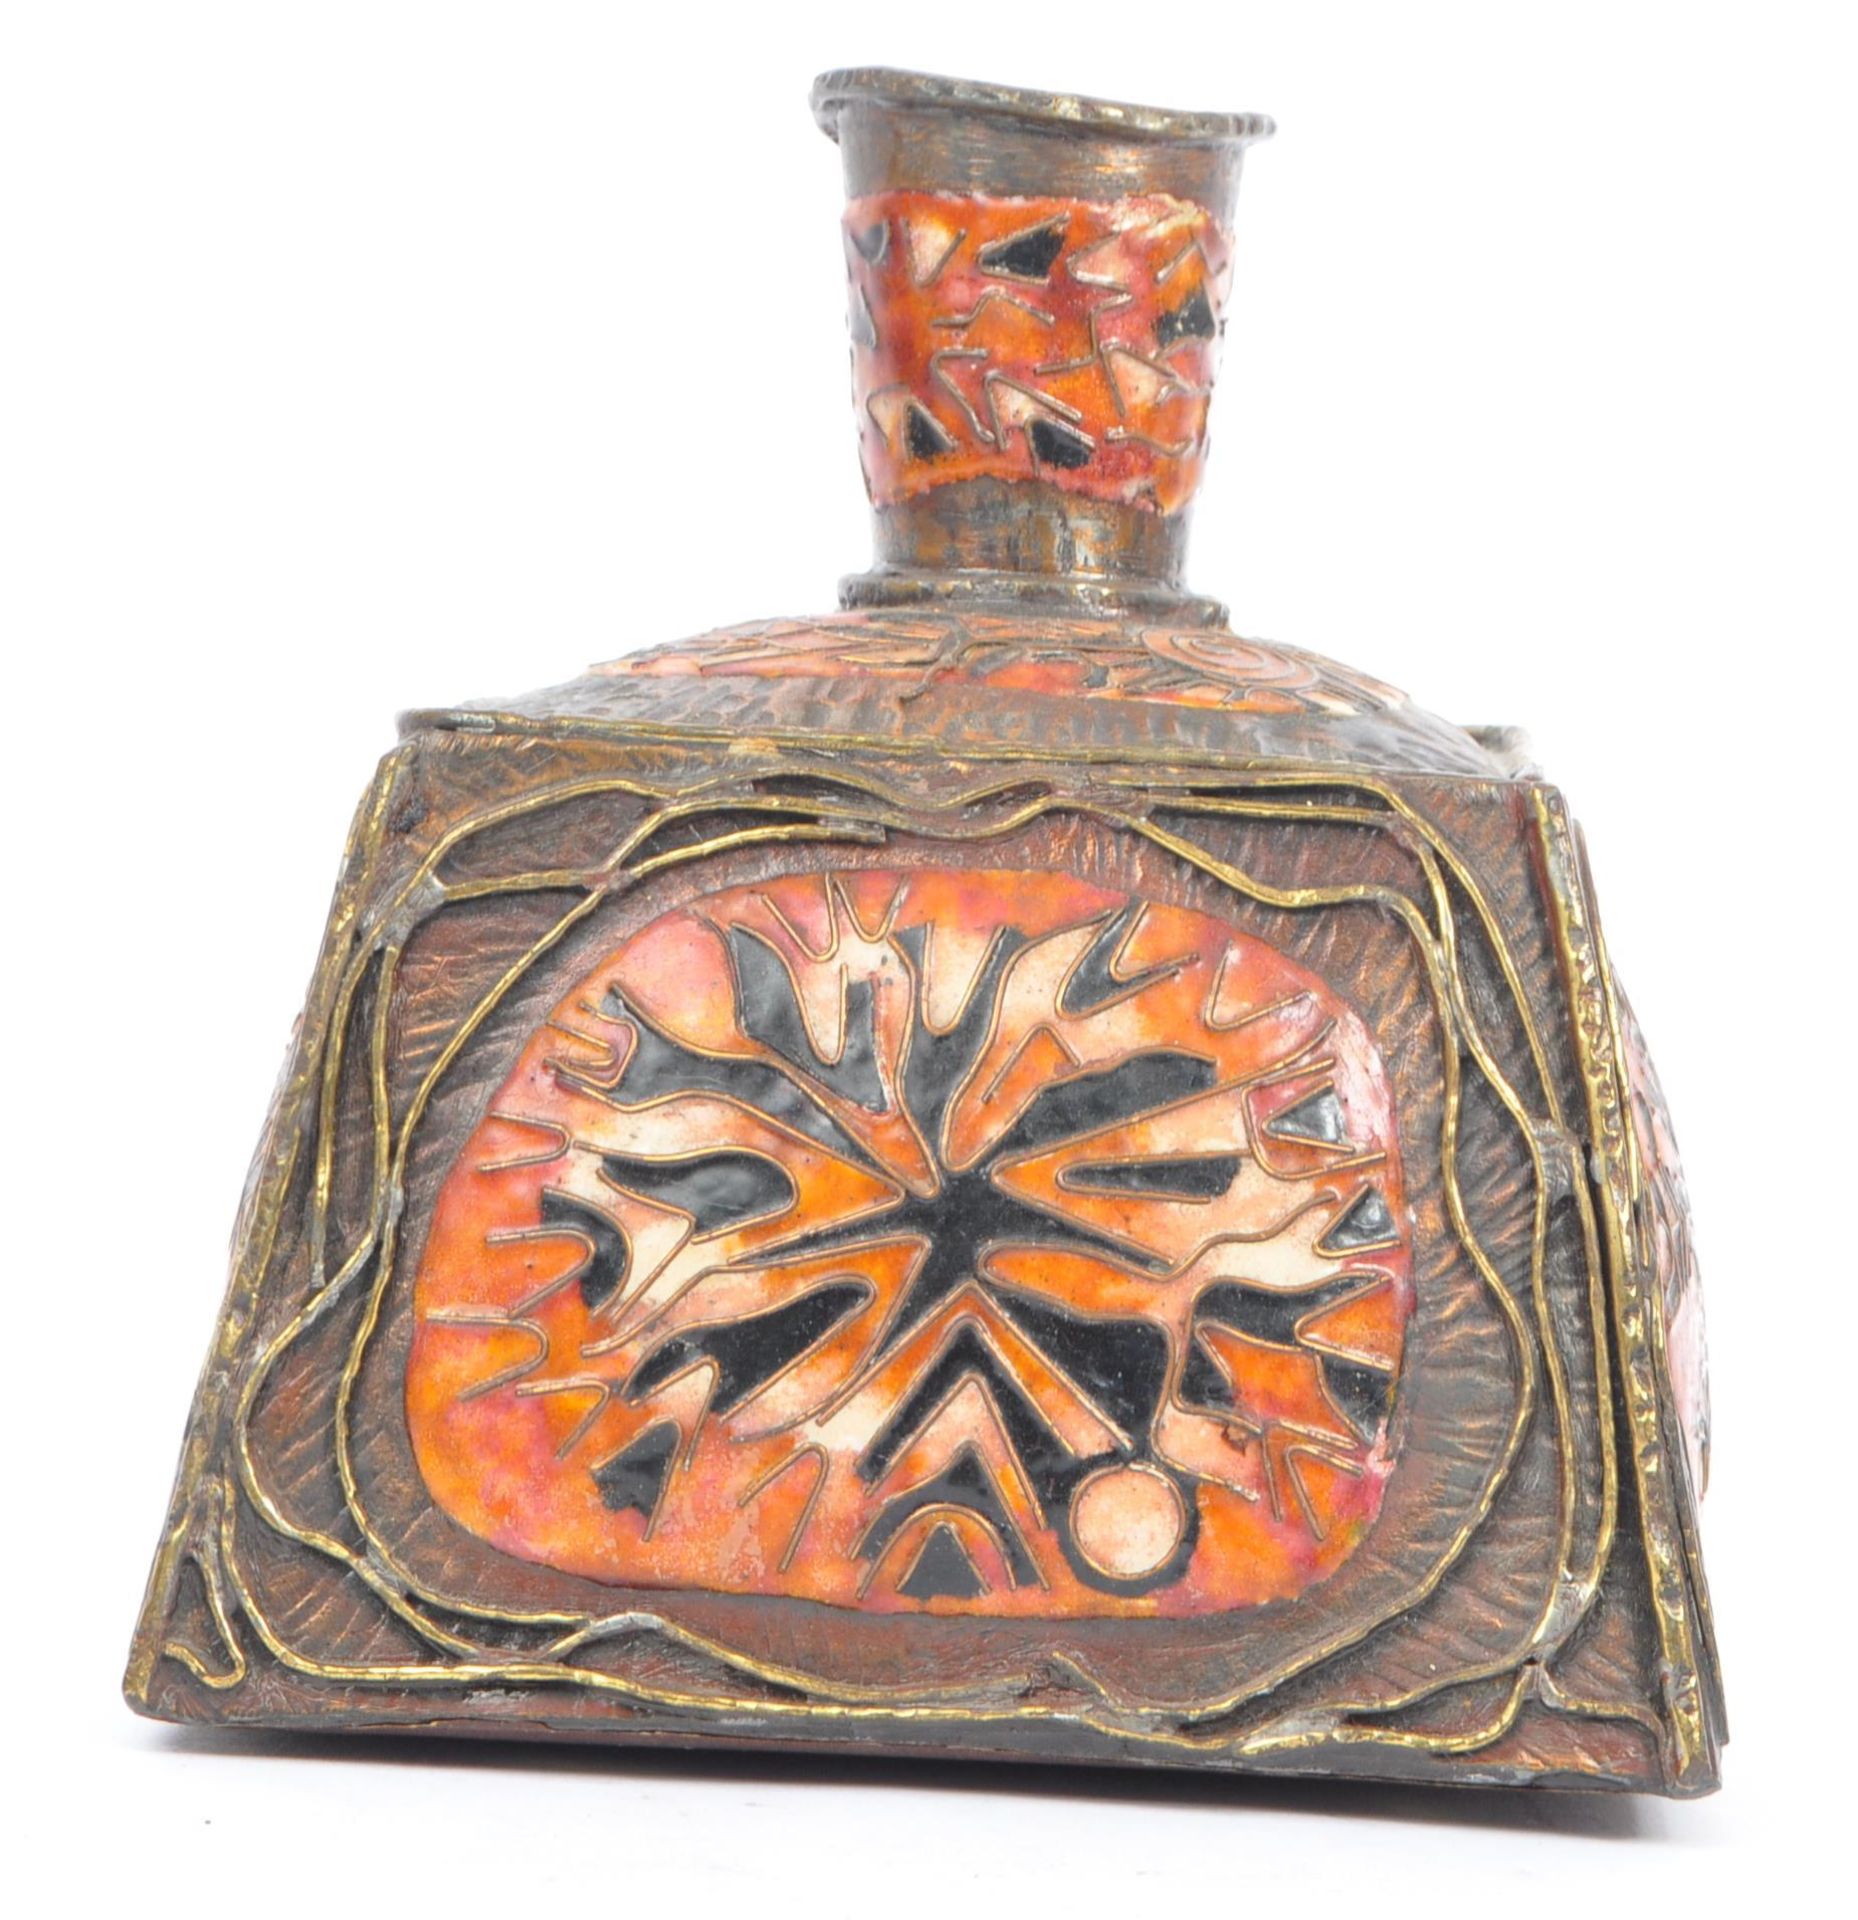 EARLY 20TH CENTURY MIDDLE EASTERN ENAMELLED BRASS VASE - Image 2 of 6